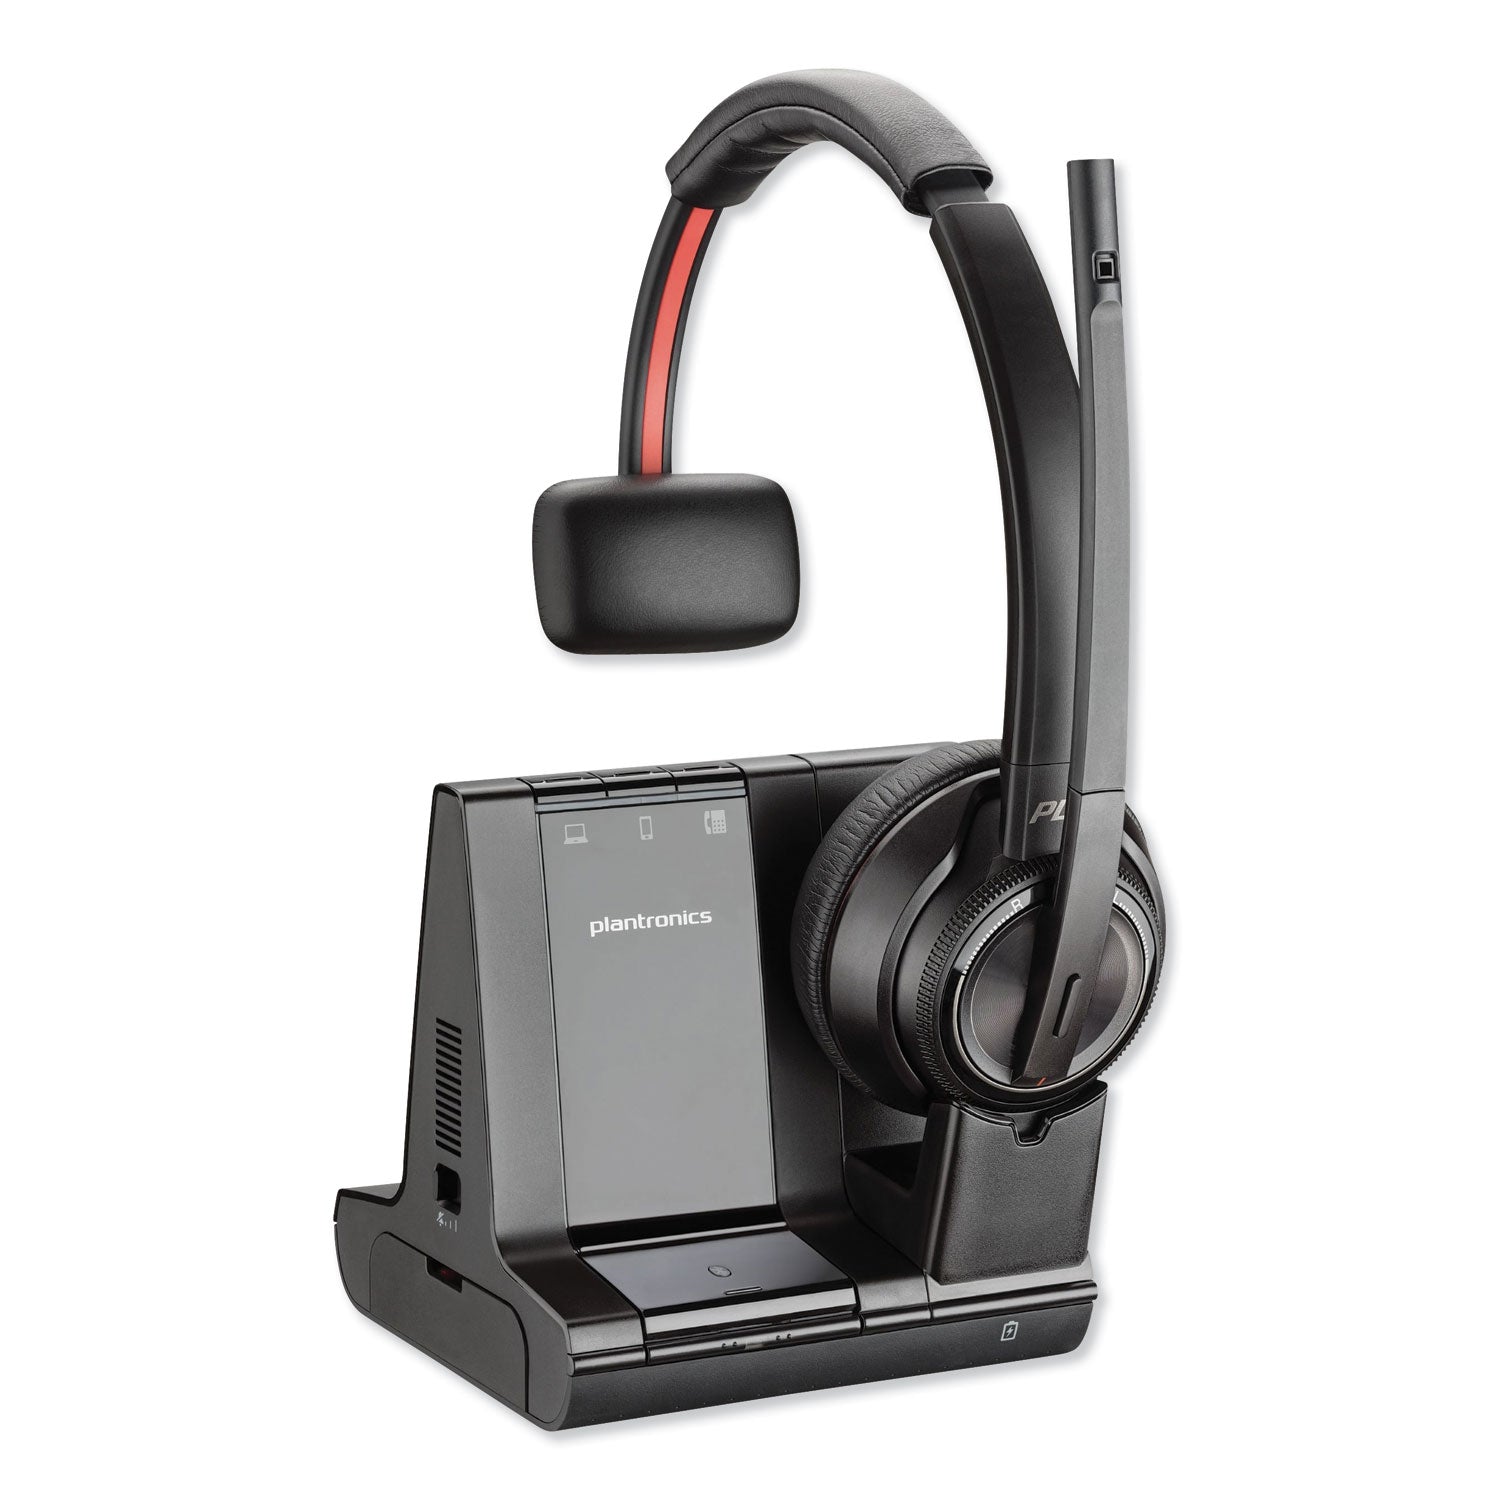 Plantronics Savi Wireless Headset System - Mono - Wireless - Bluetooth/DECT 6.0 - 590 ft - 20 Hz - 20 kHz - Over-the-head - Monaural - Noise Cancelling Microphone - Noise Canceling - Black - 1